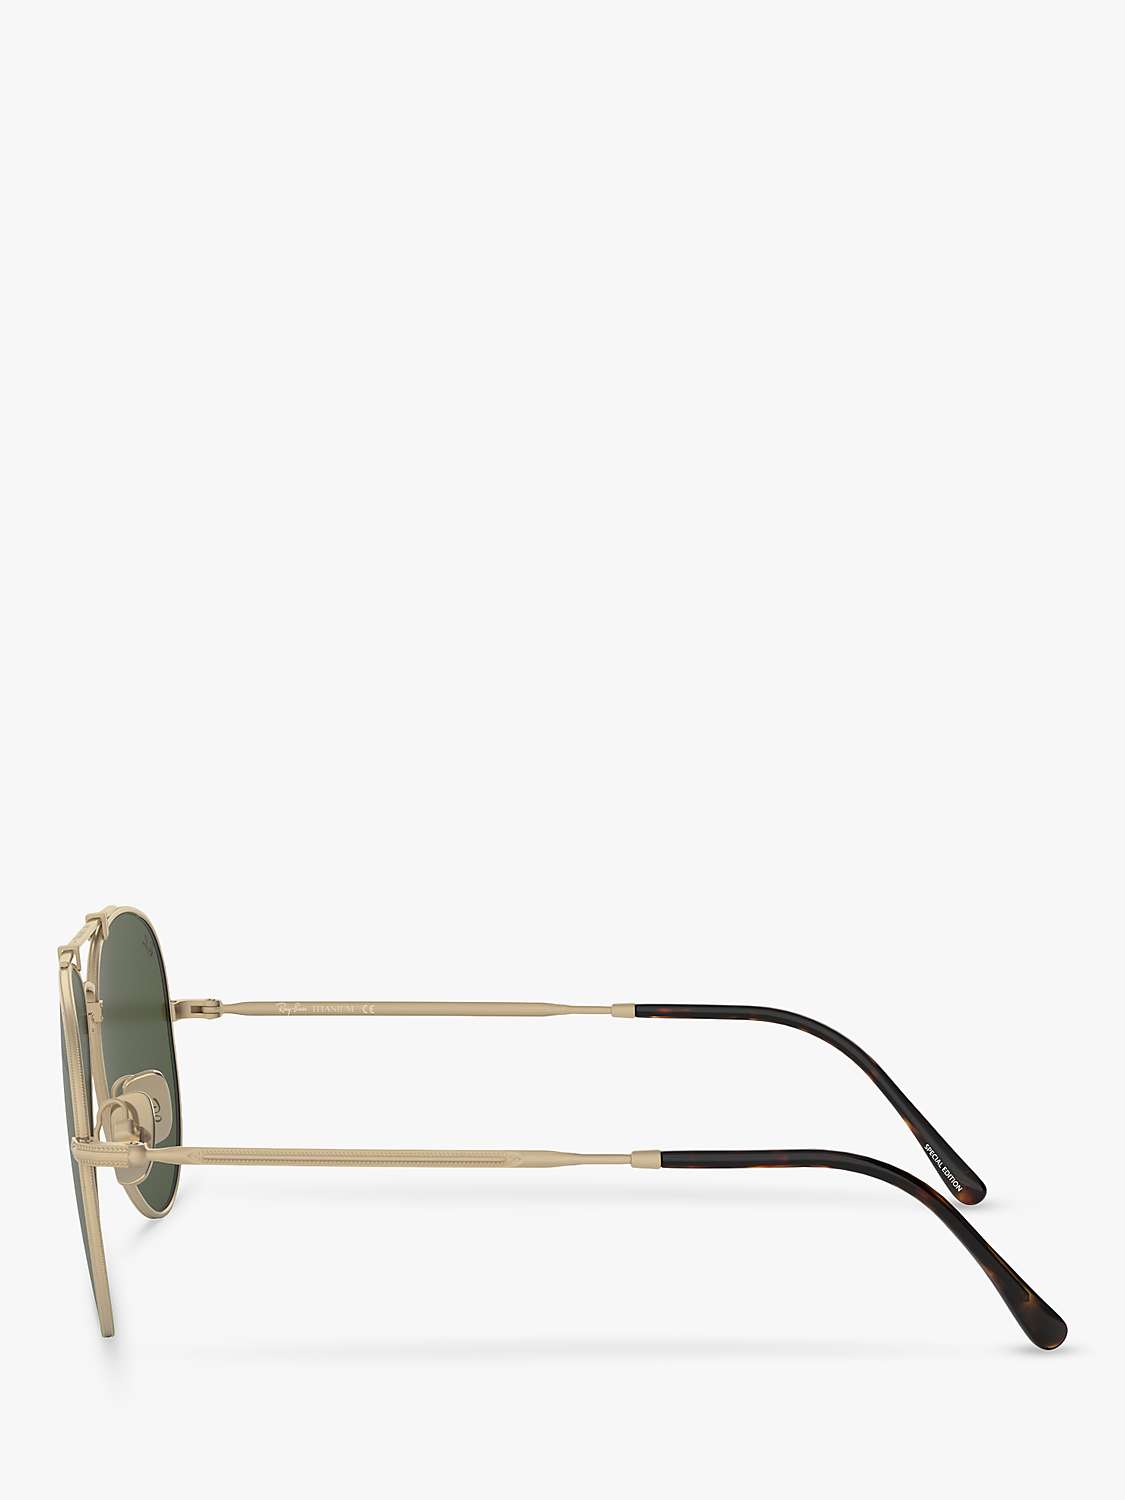 Buy Ray-Ban RB8125 Unisex Aviator Sunglasses, Gold/Green Online at johnlewis.com